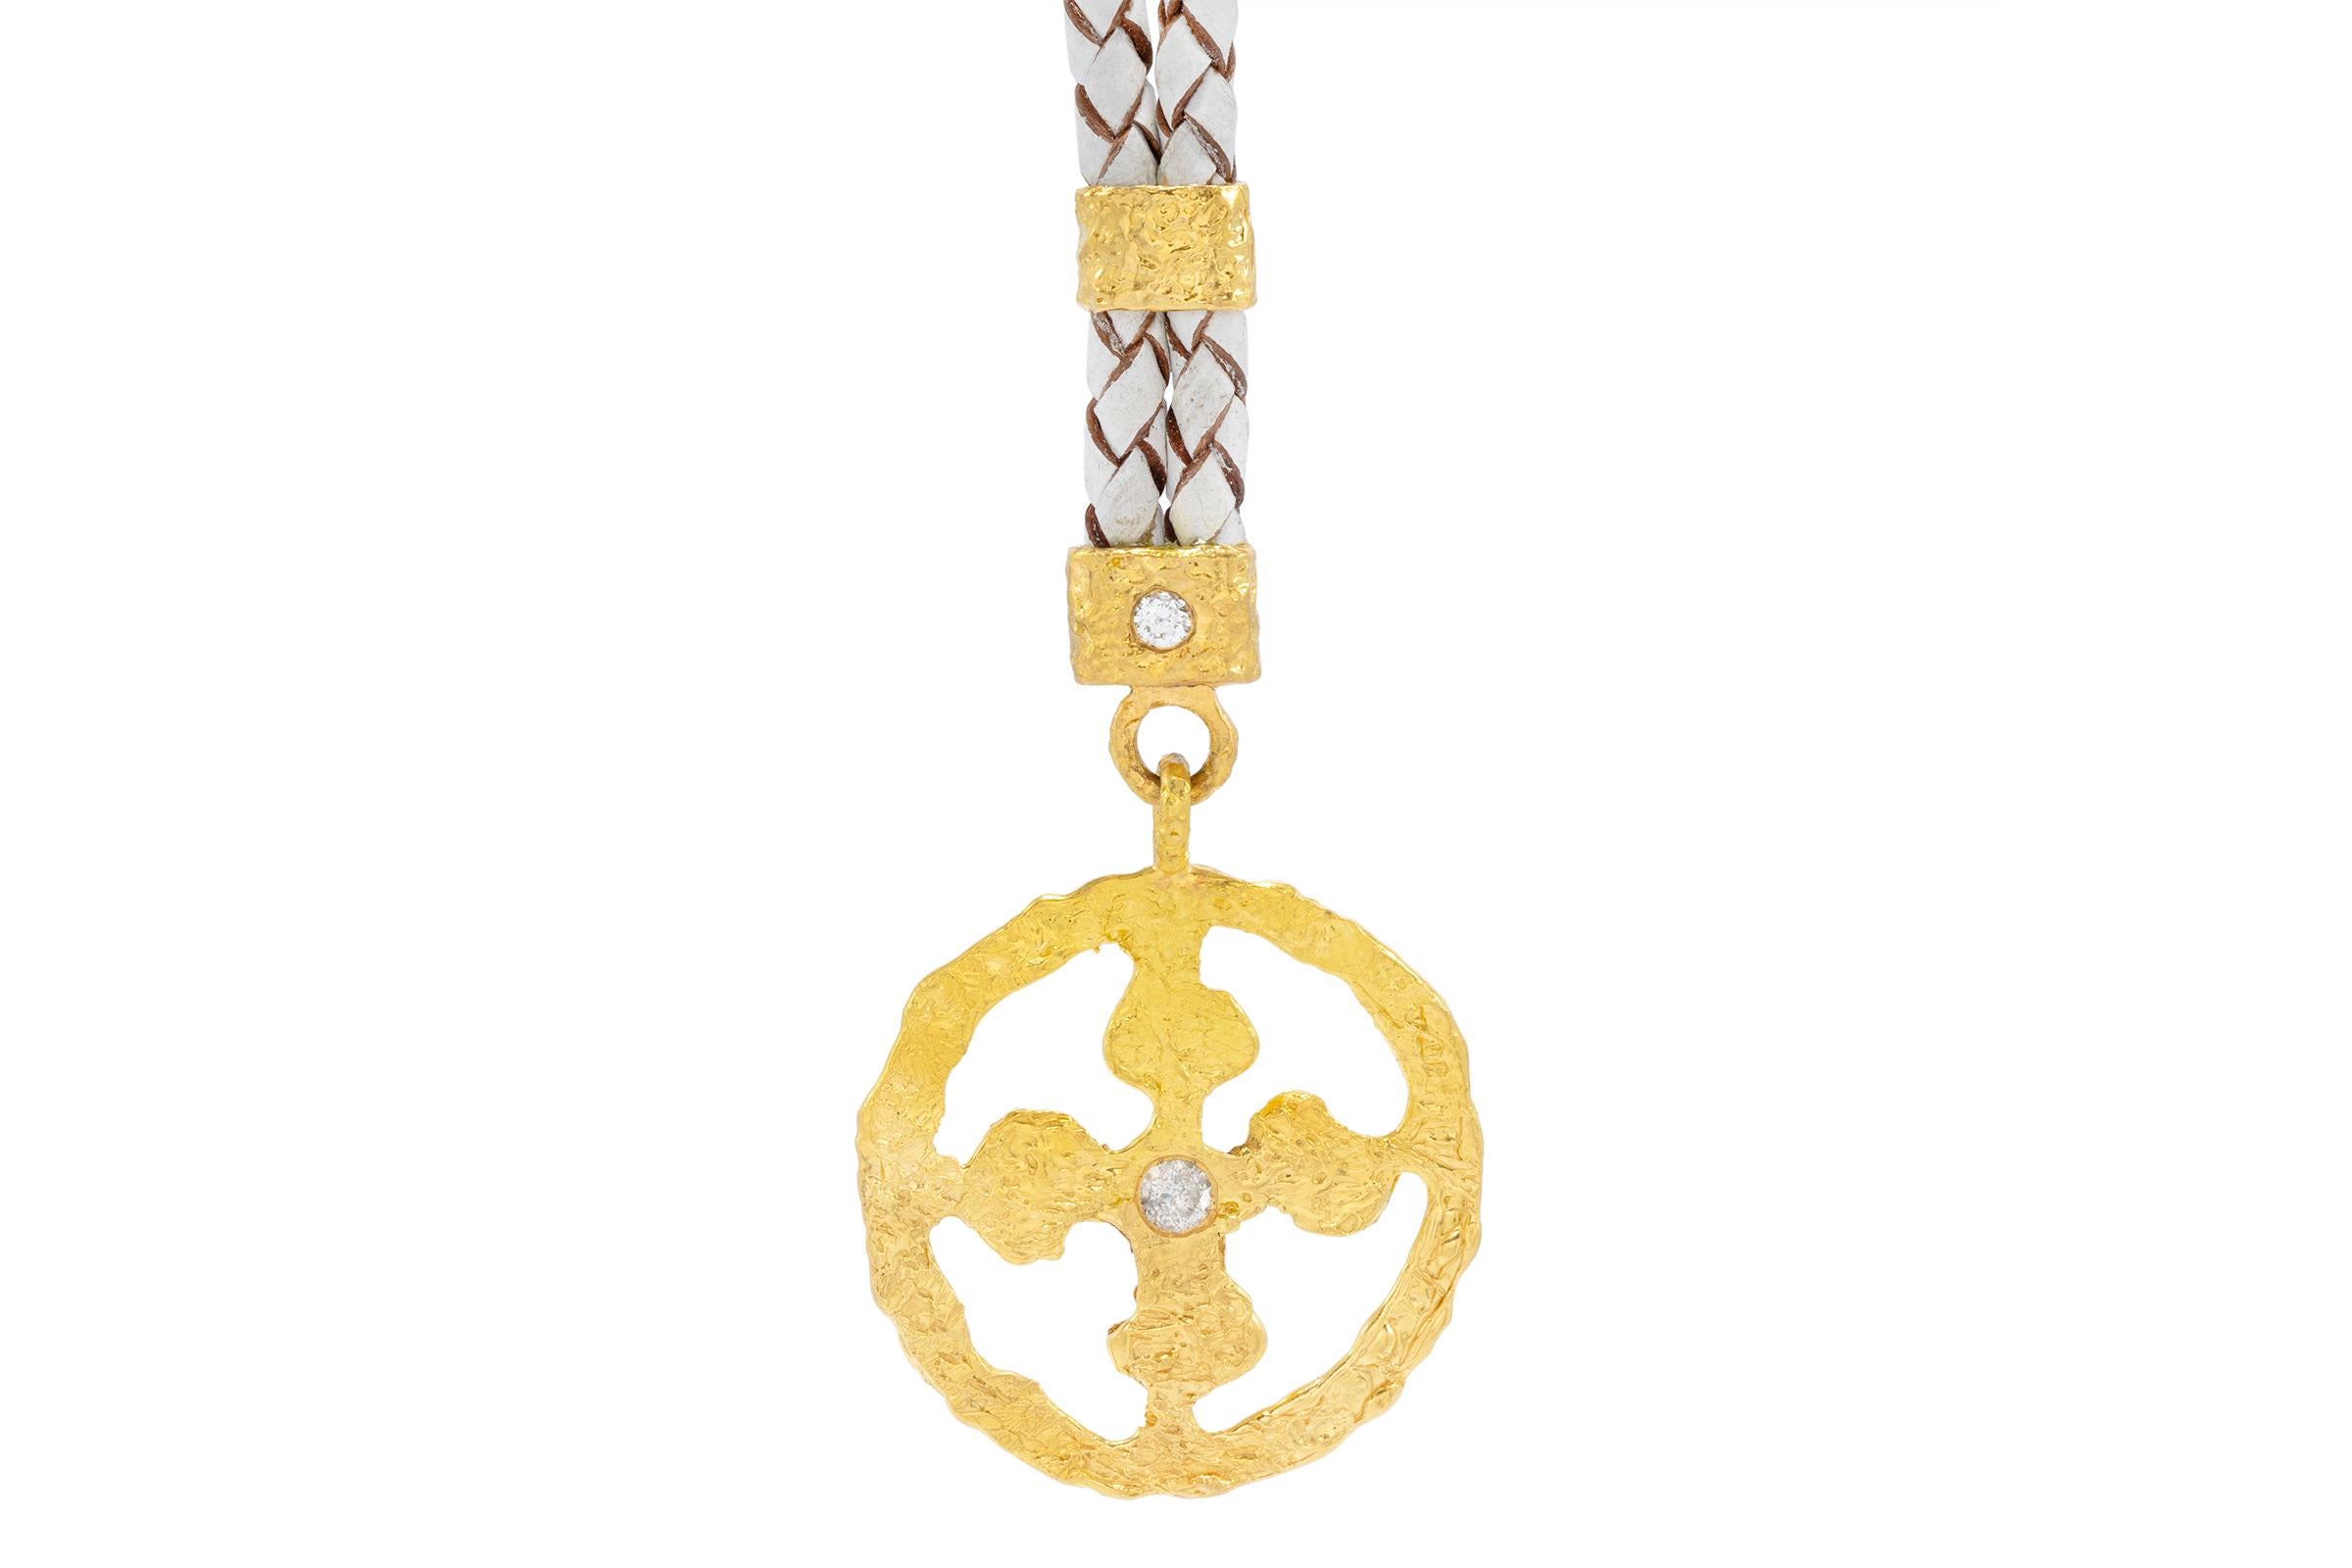 Wear our beautiful Allegra Leather necklaces with any of our specially made pendants from our Allegra Collection, for a casual yet sophisticated look. Our leather necklaces are unique as they incorporate handmade 22k gold accents throughout, feature